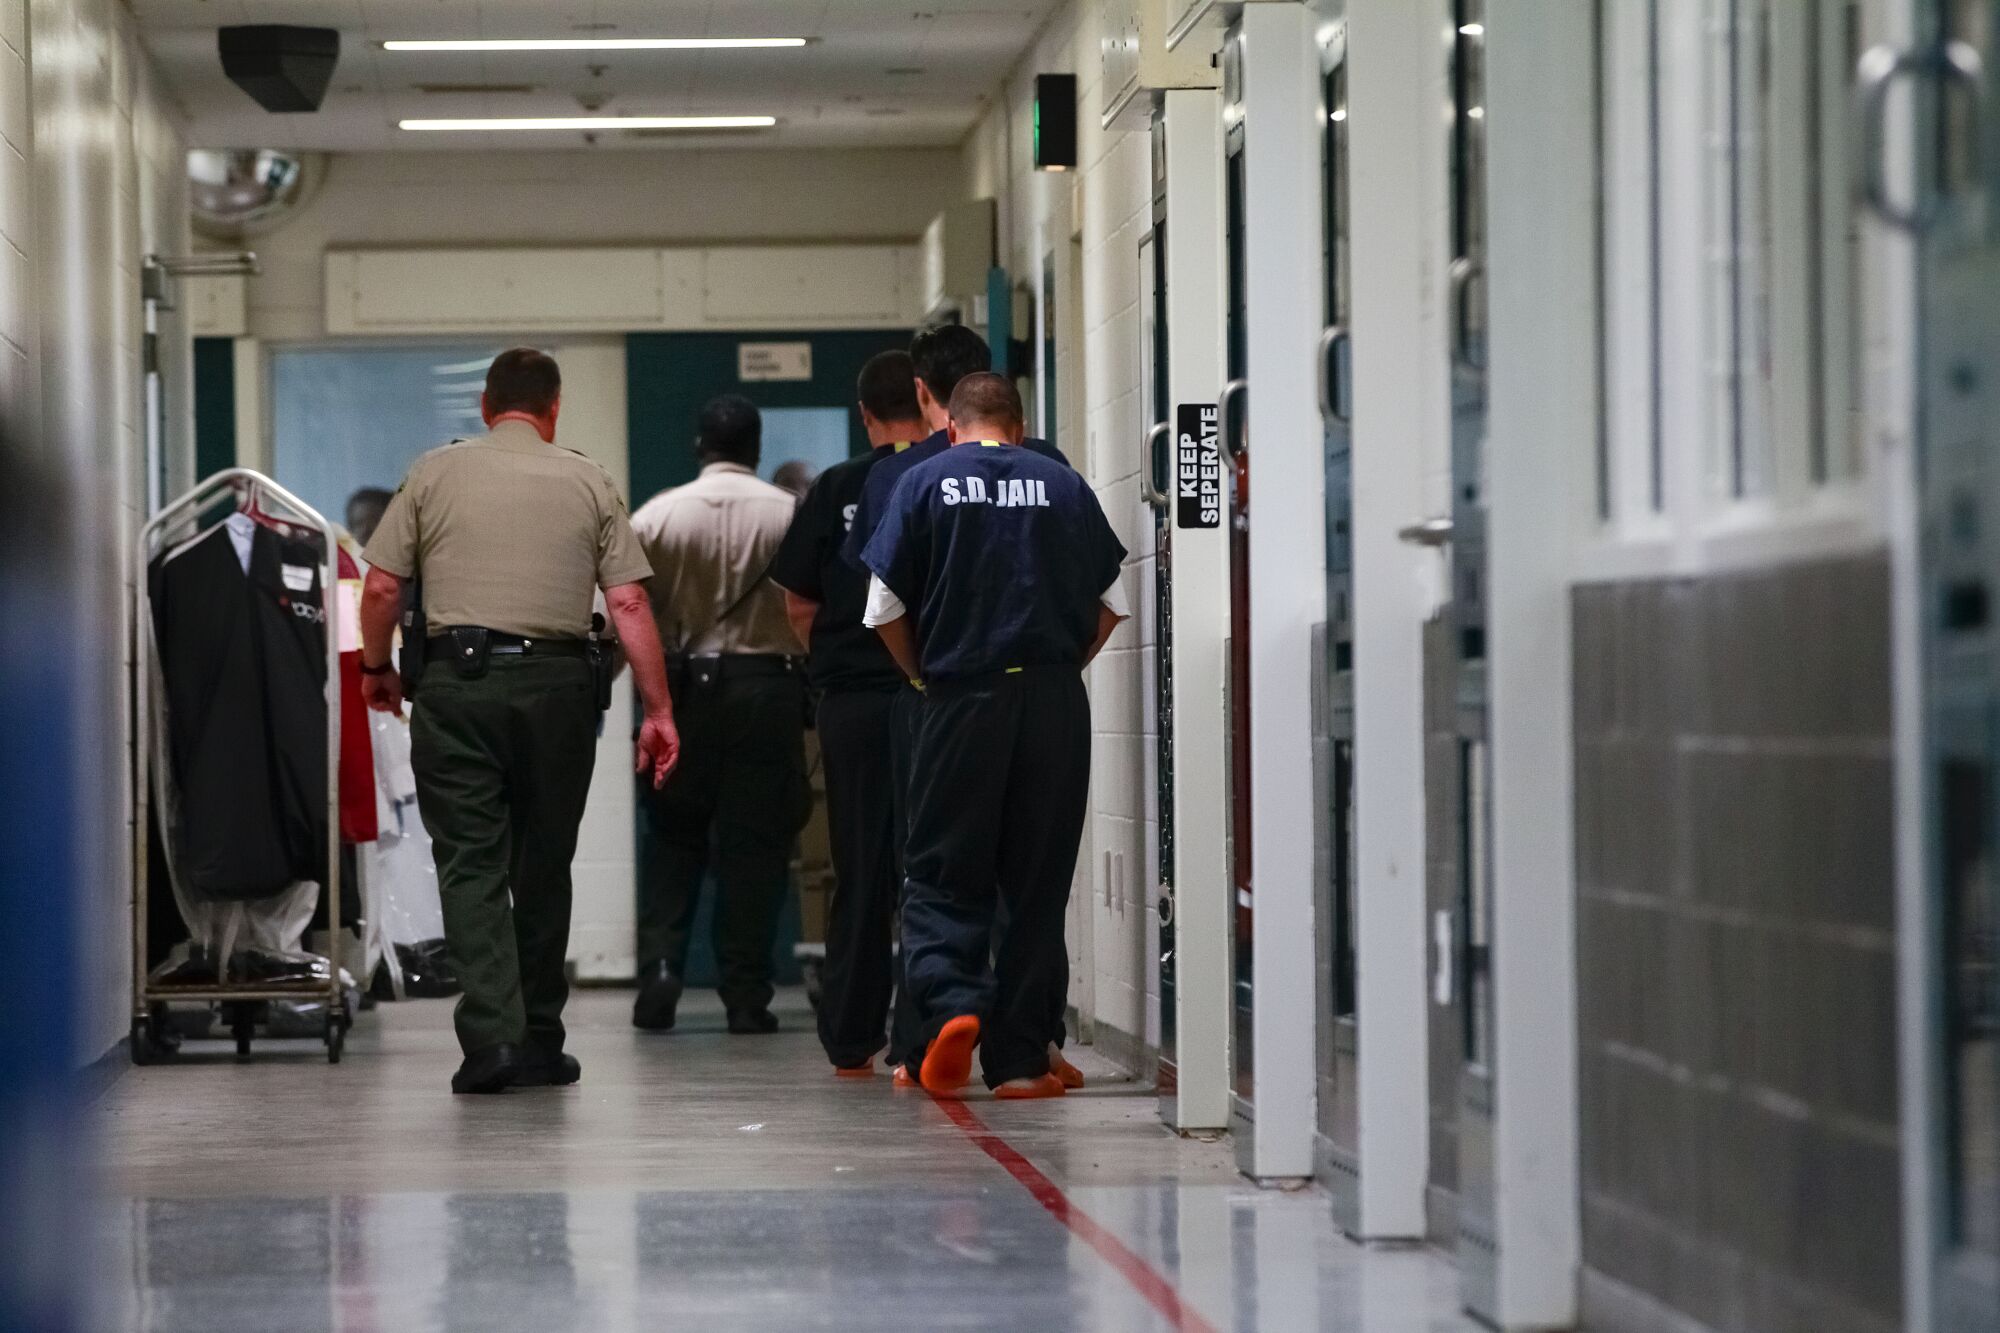 Sheriff's Deputies escorts inmates down a secured hallway at downtown Central Jail in 2015.